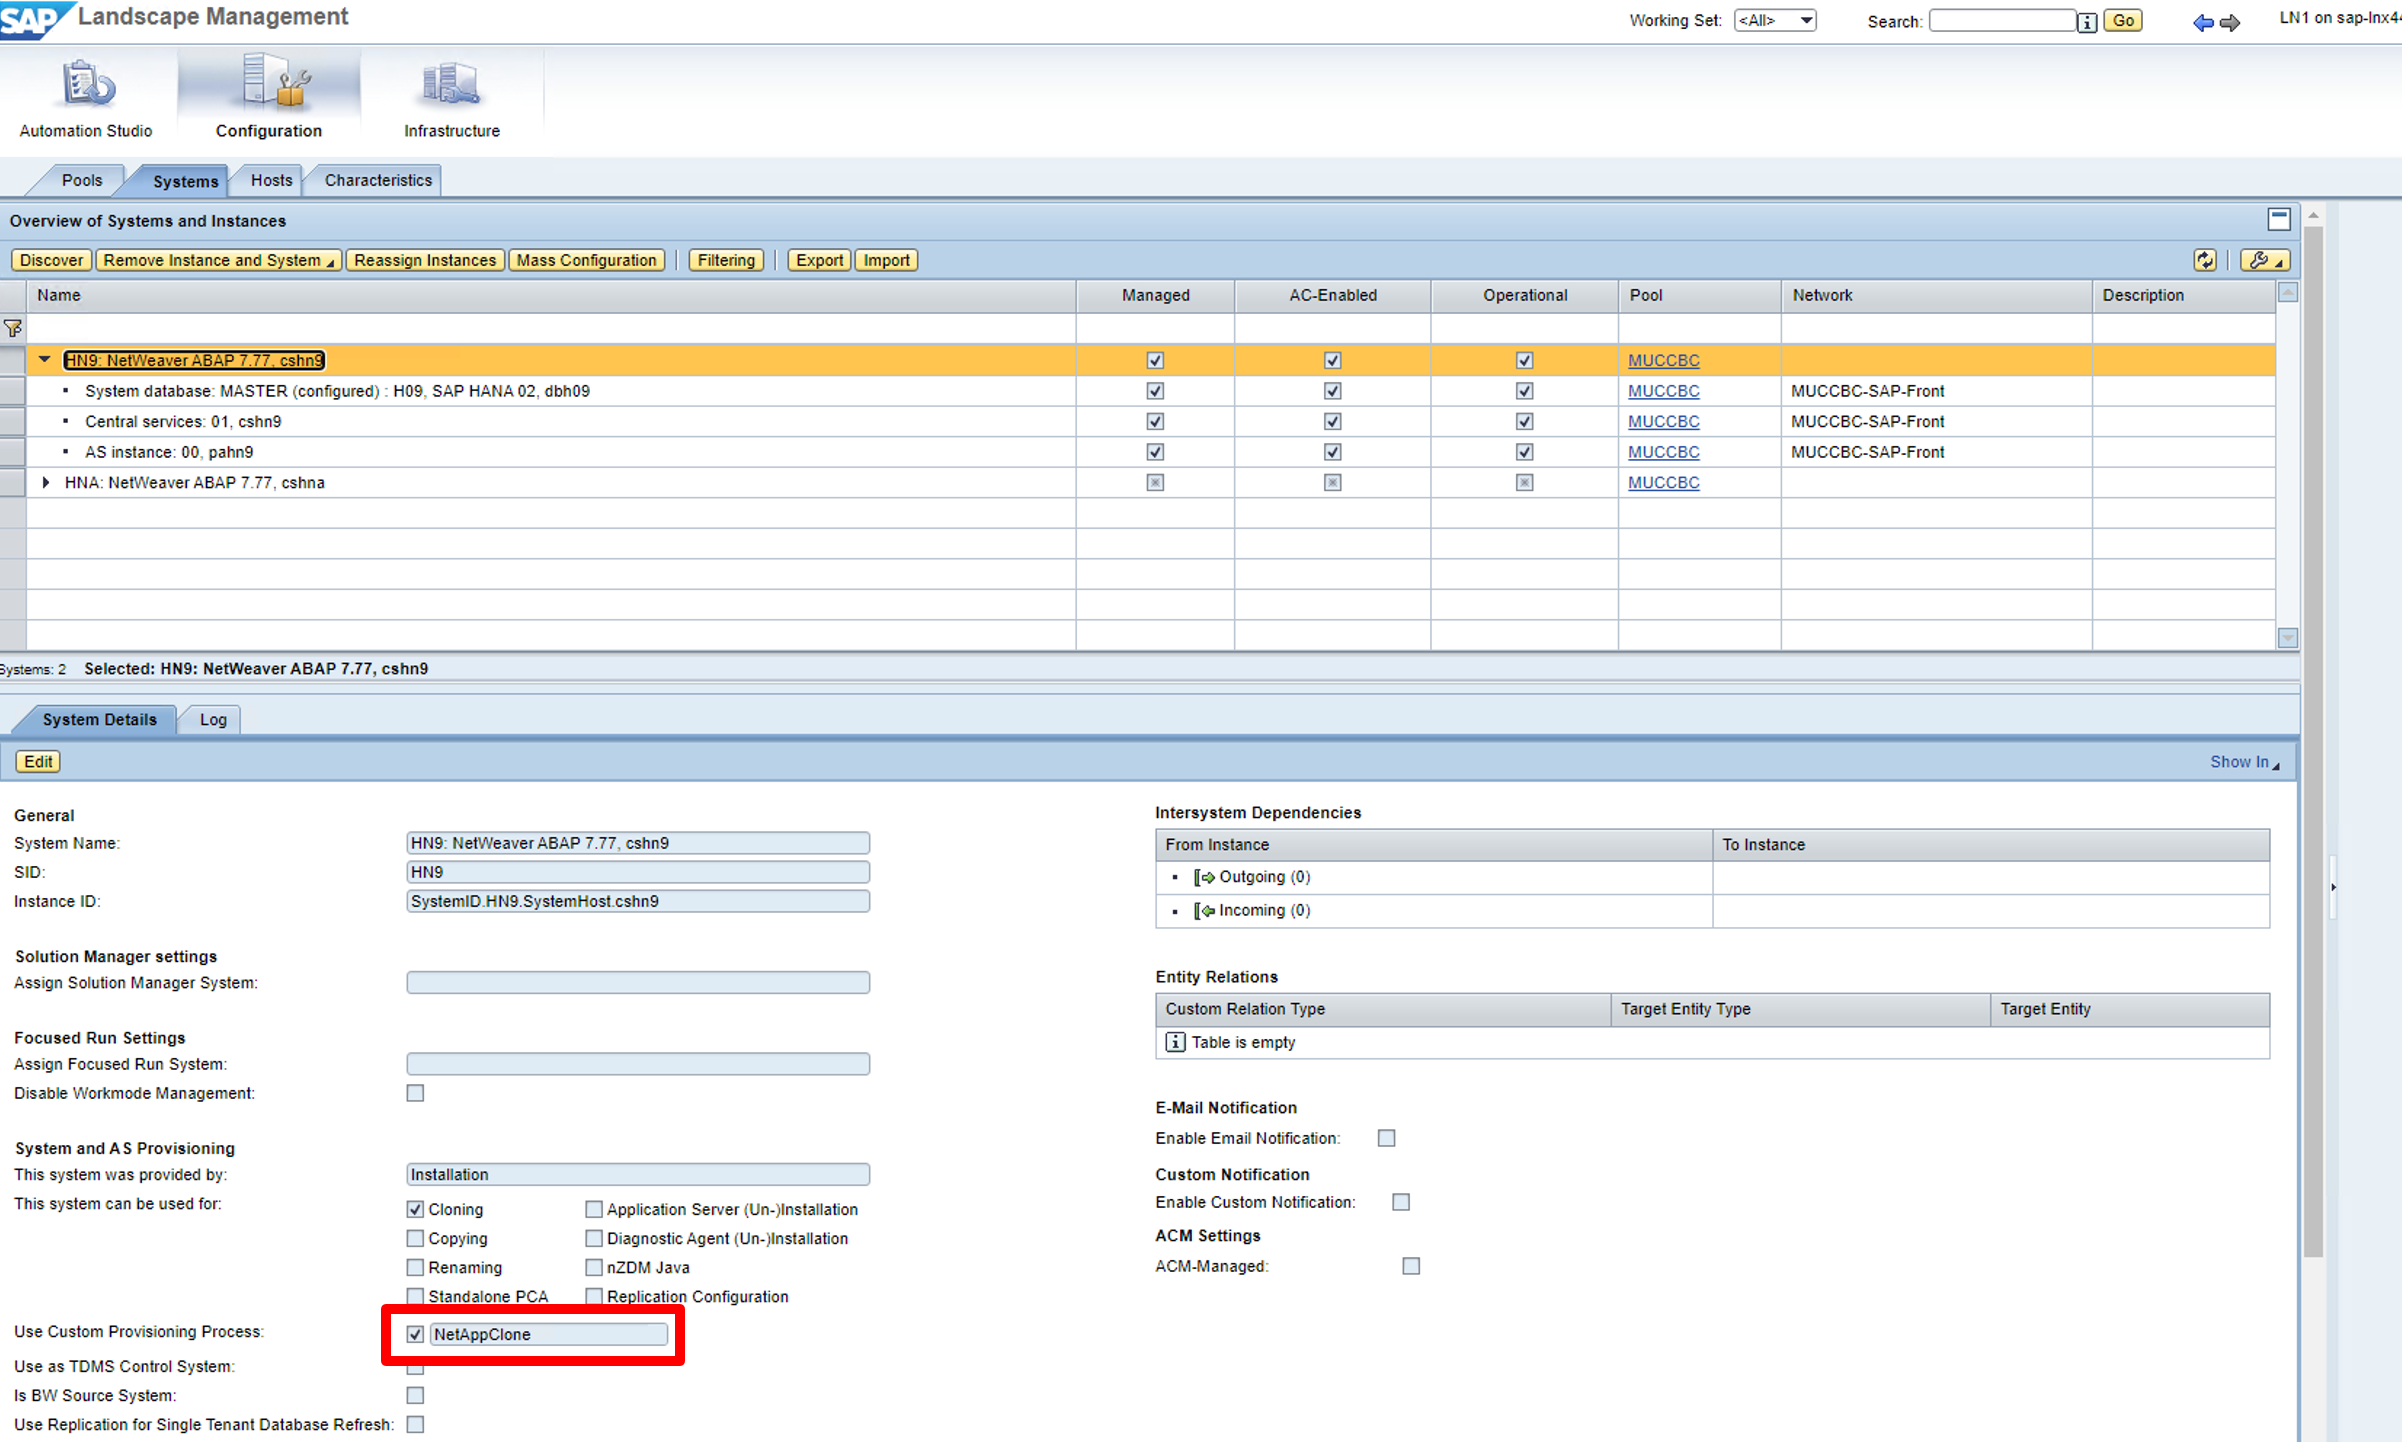 Screenshot of the SAP LaMa Configuration > Systems> System Details screen. Use Custom Provisioning Process checkbox is highlighted.